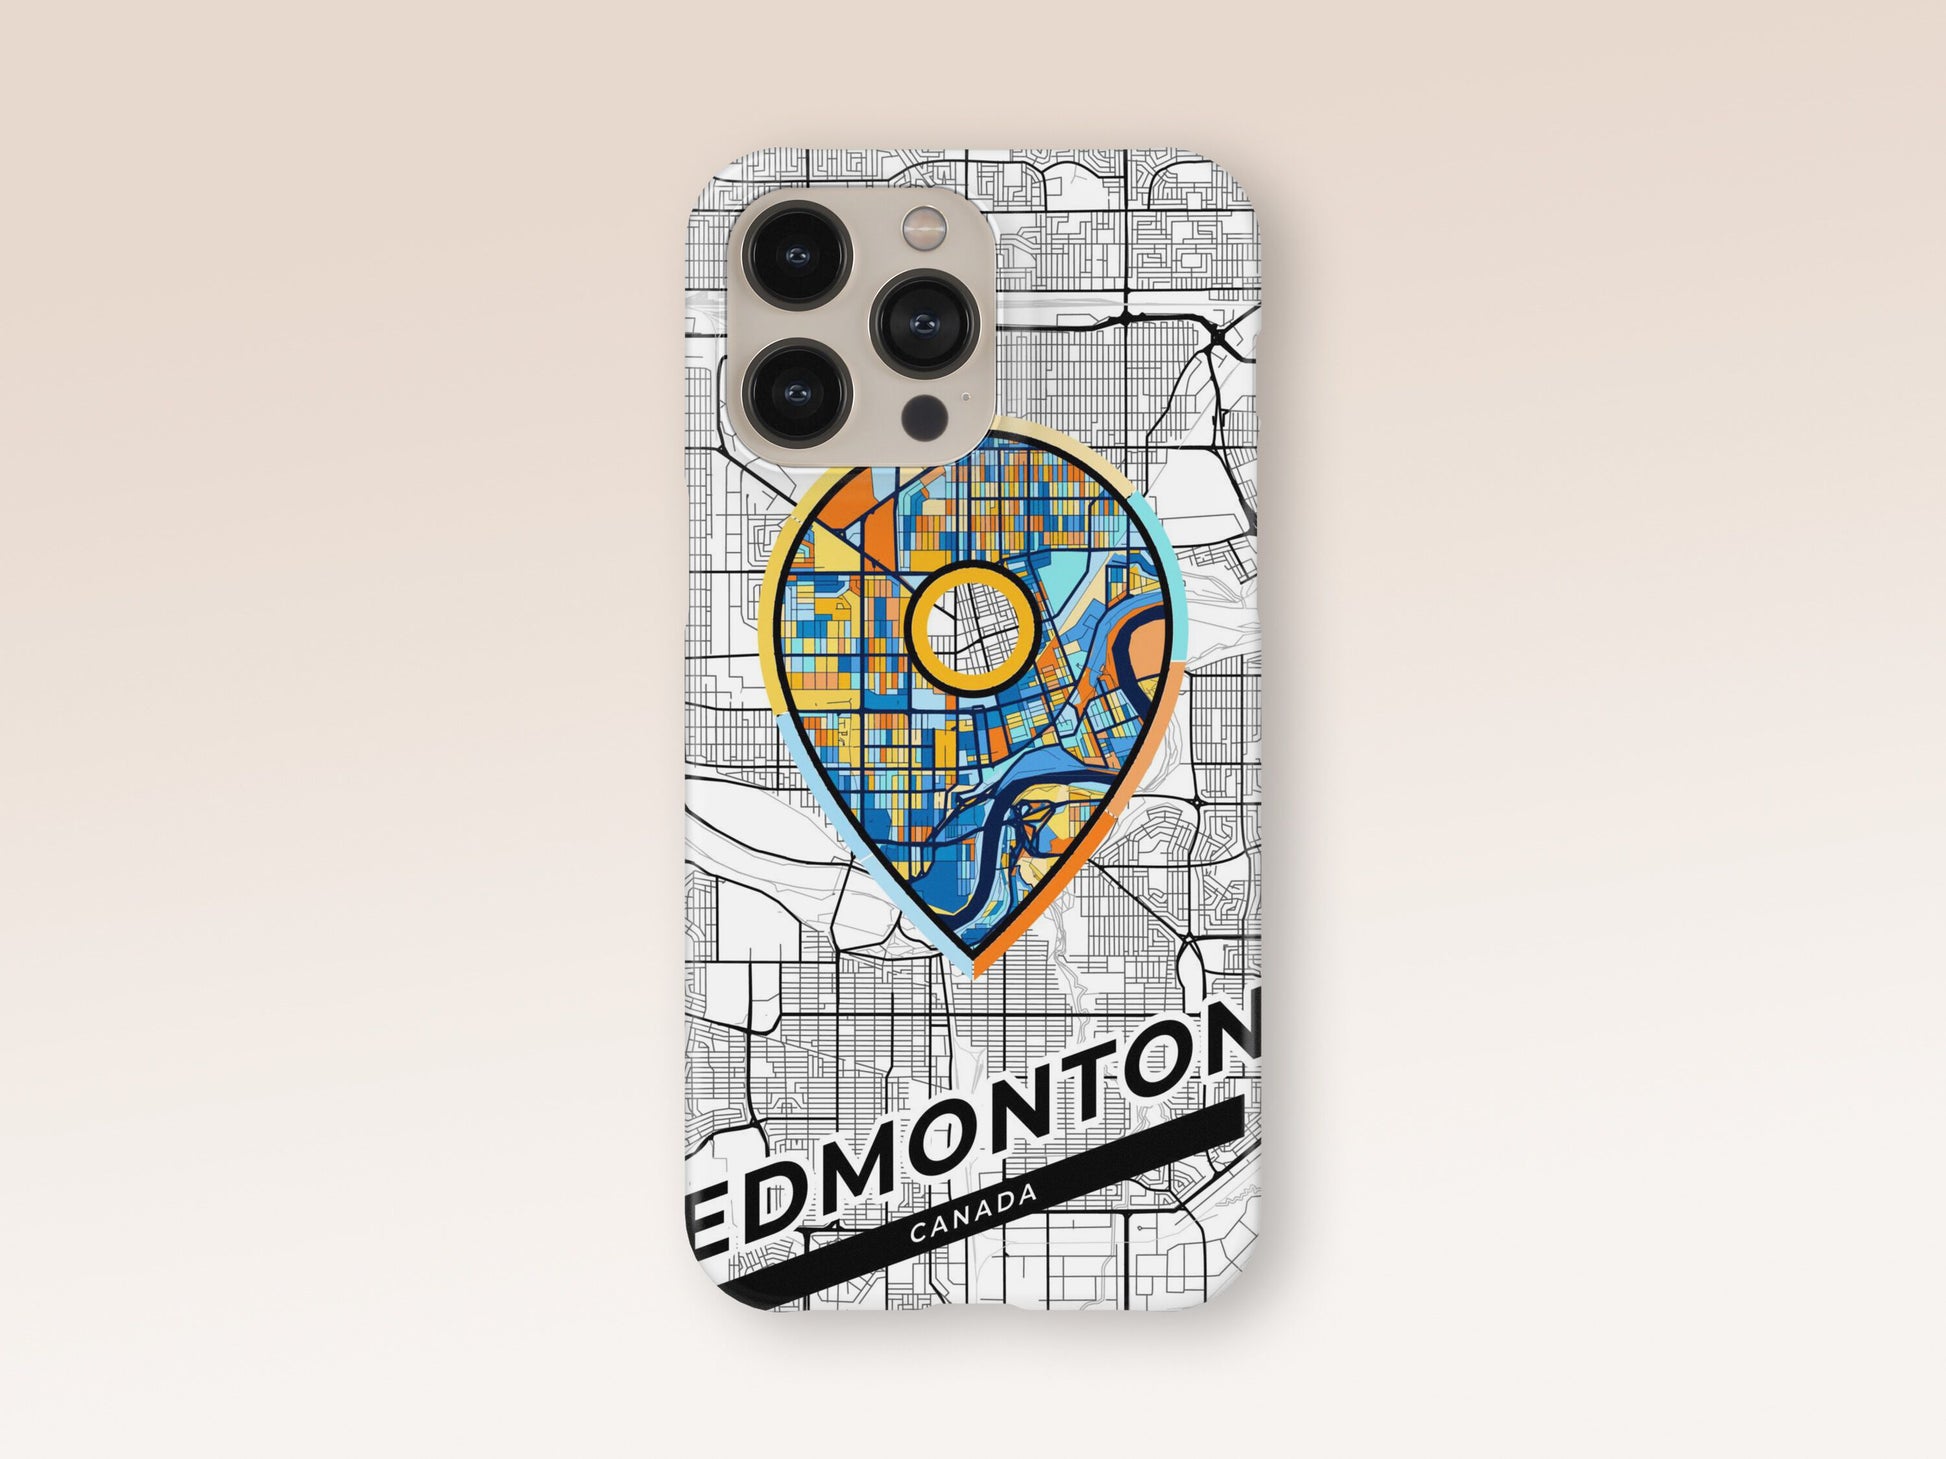 Edmonton Canada slim phone case with colorful icon. Birthday, wedding or housewarming gift. Couple match cases. 1